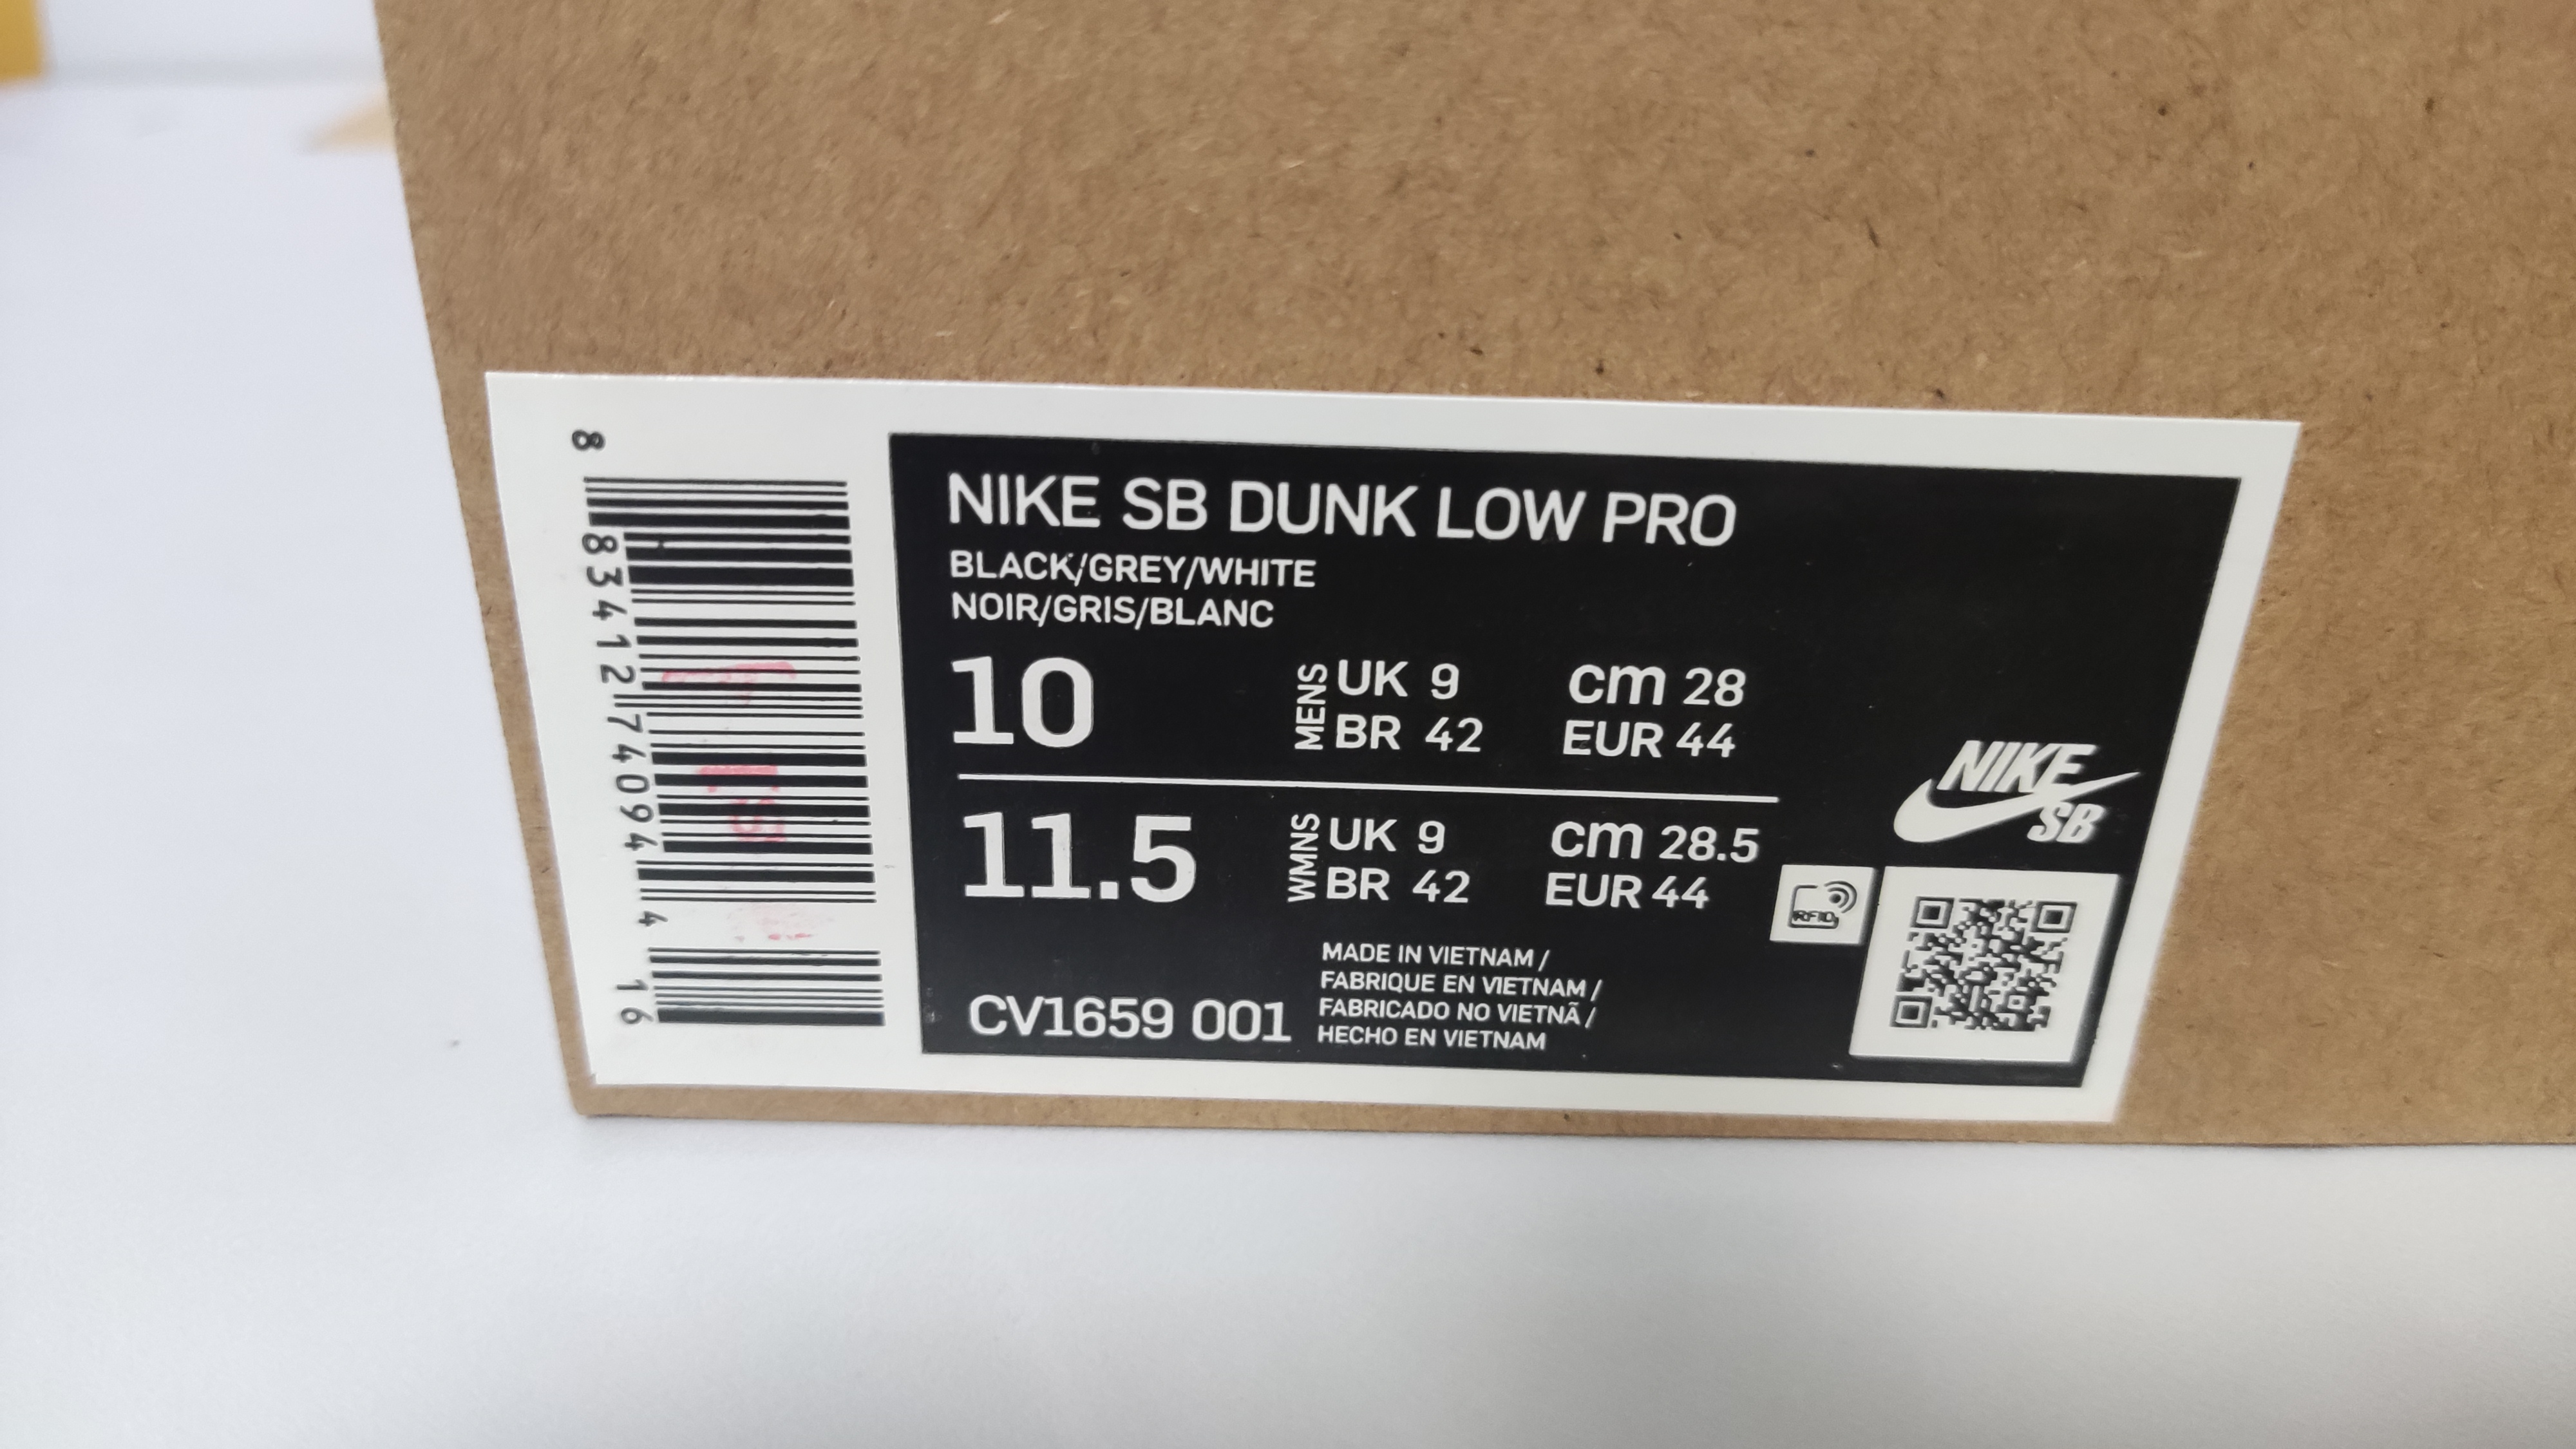 QC Picture Replica Dunks Low Pro Iso VX1000 Camcorder From Jdfoot